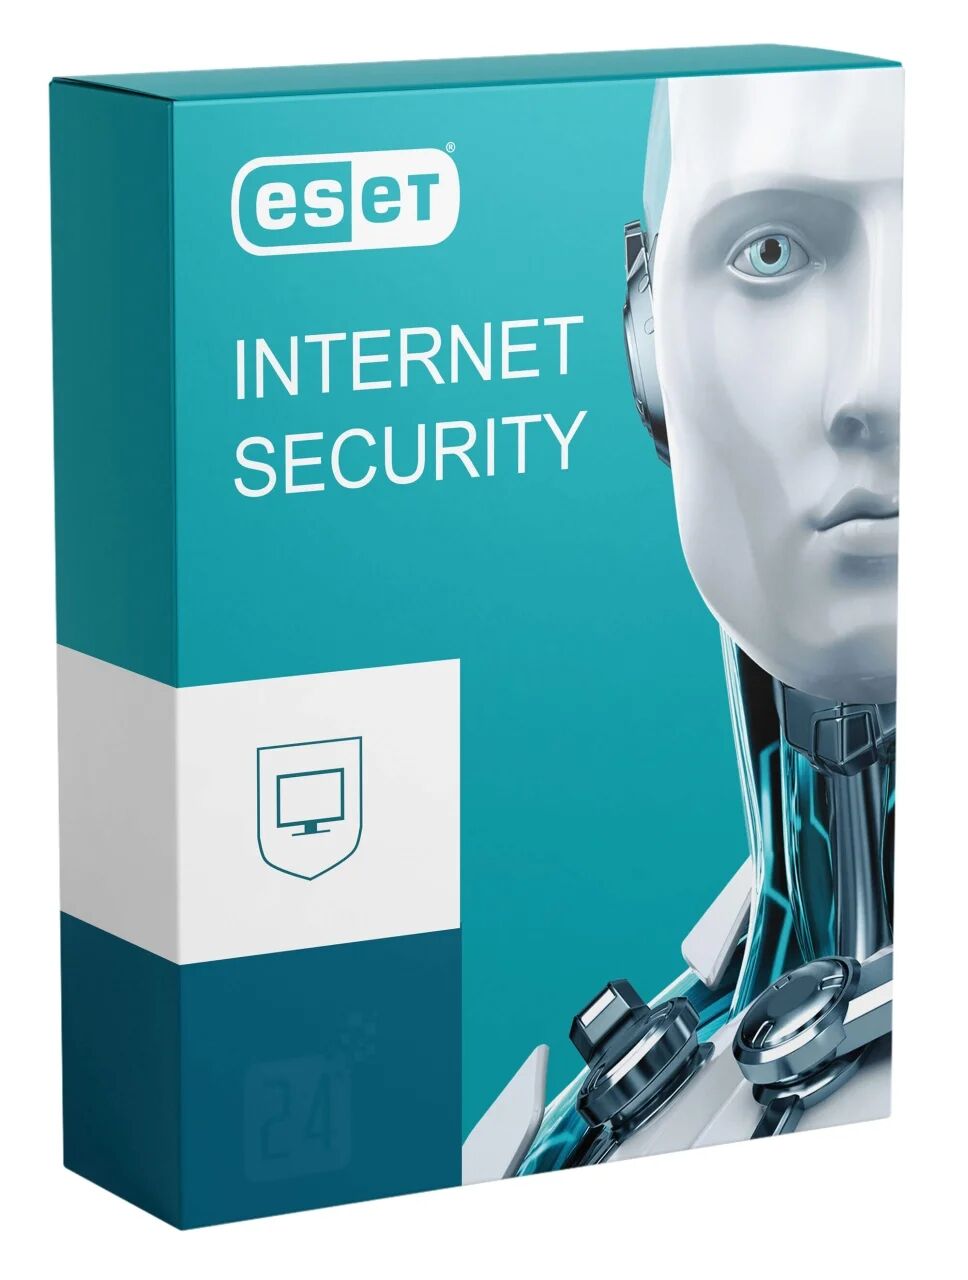 ESET Internet Security 10 Devices 1 Year